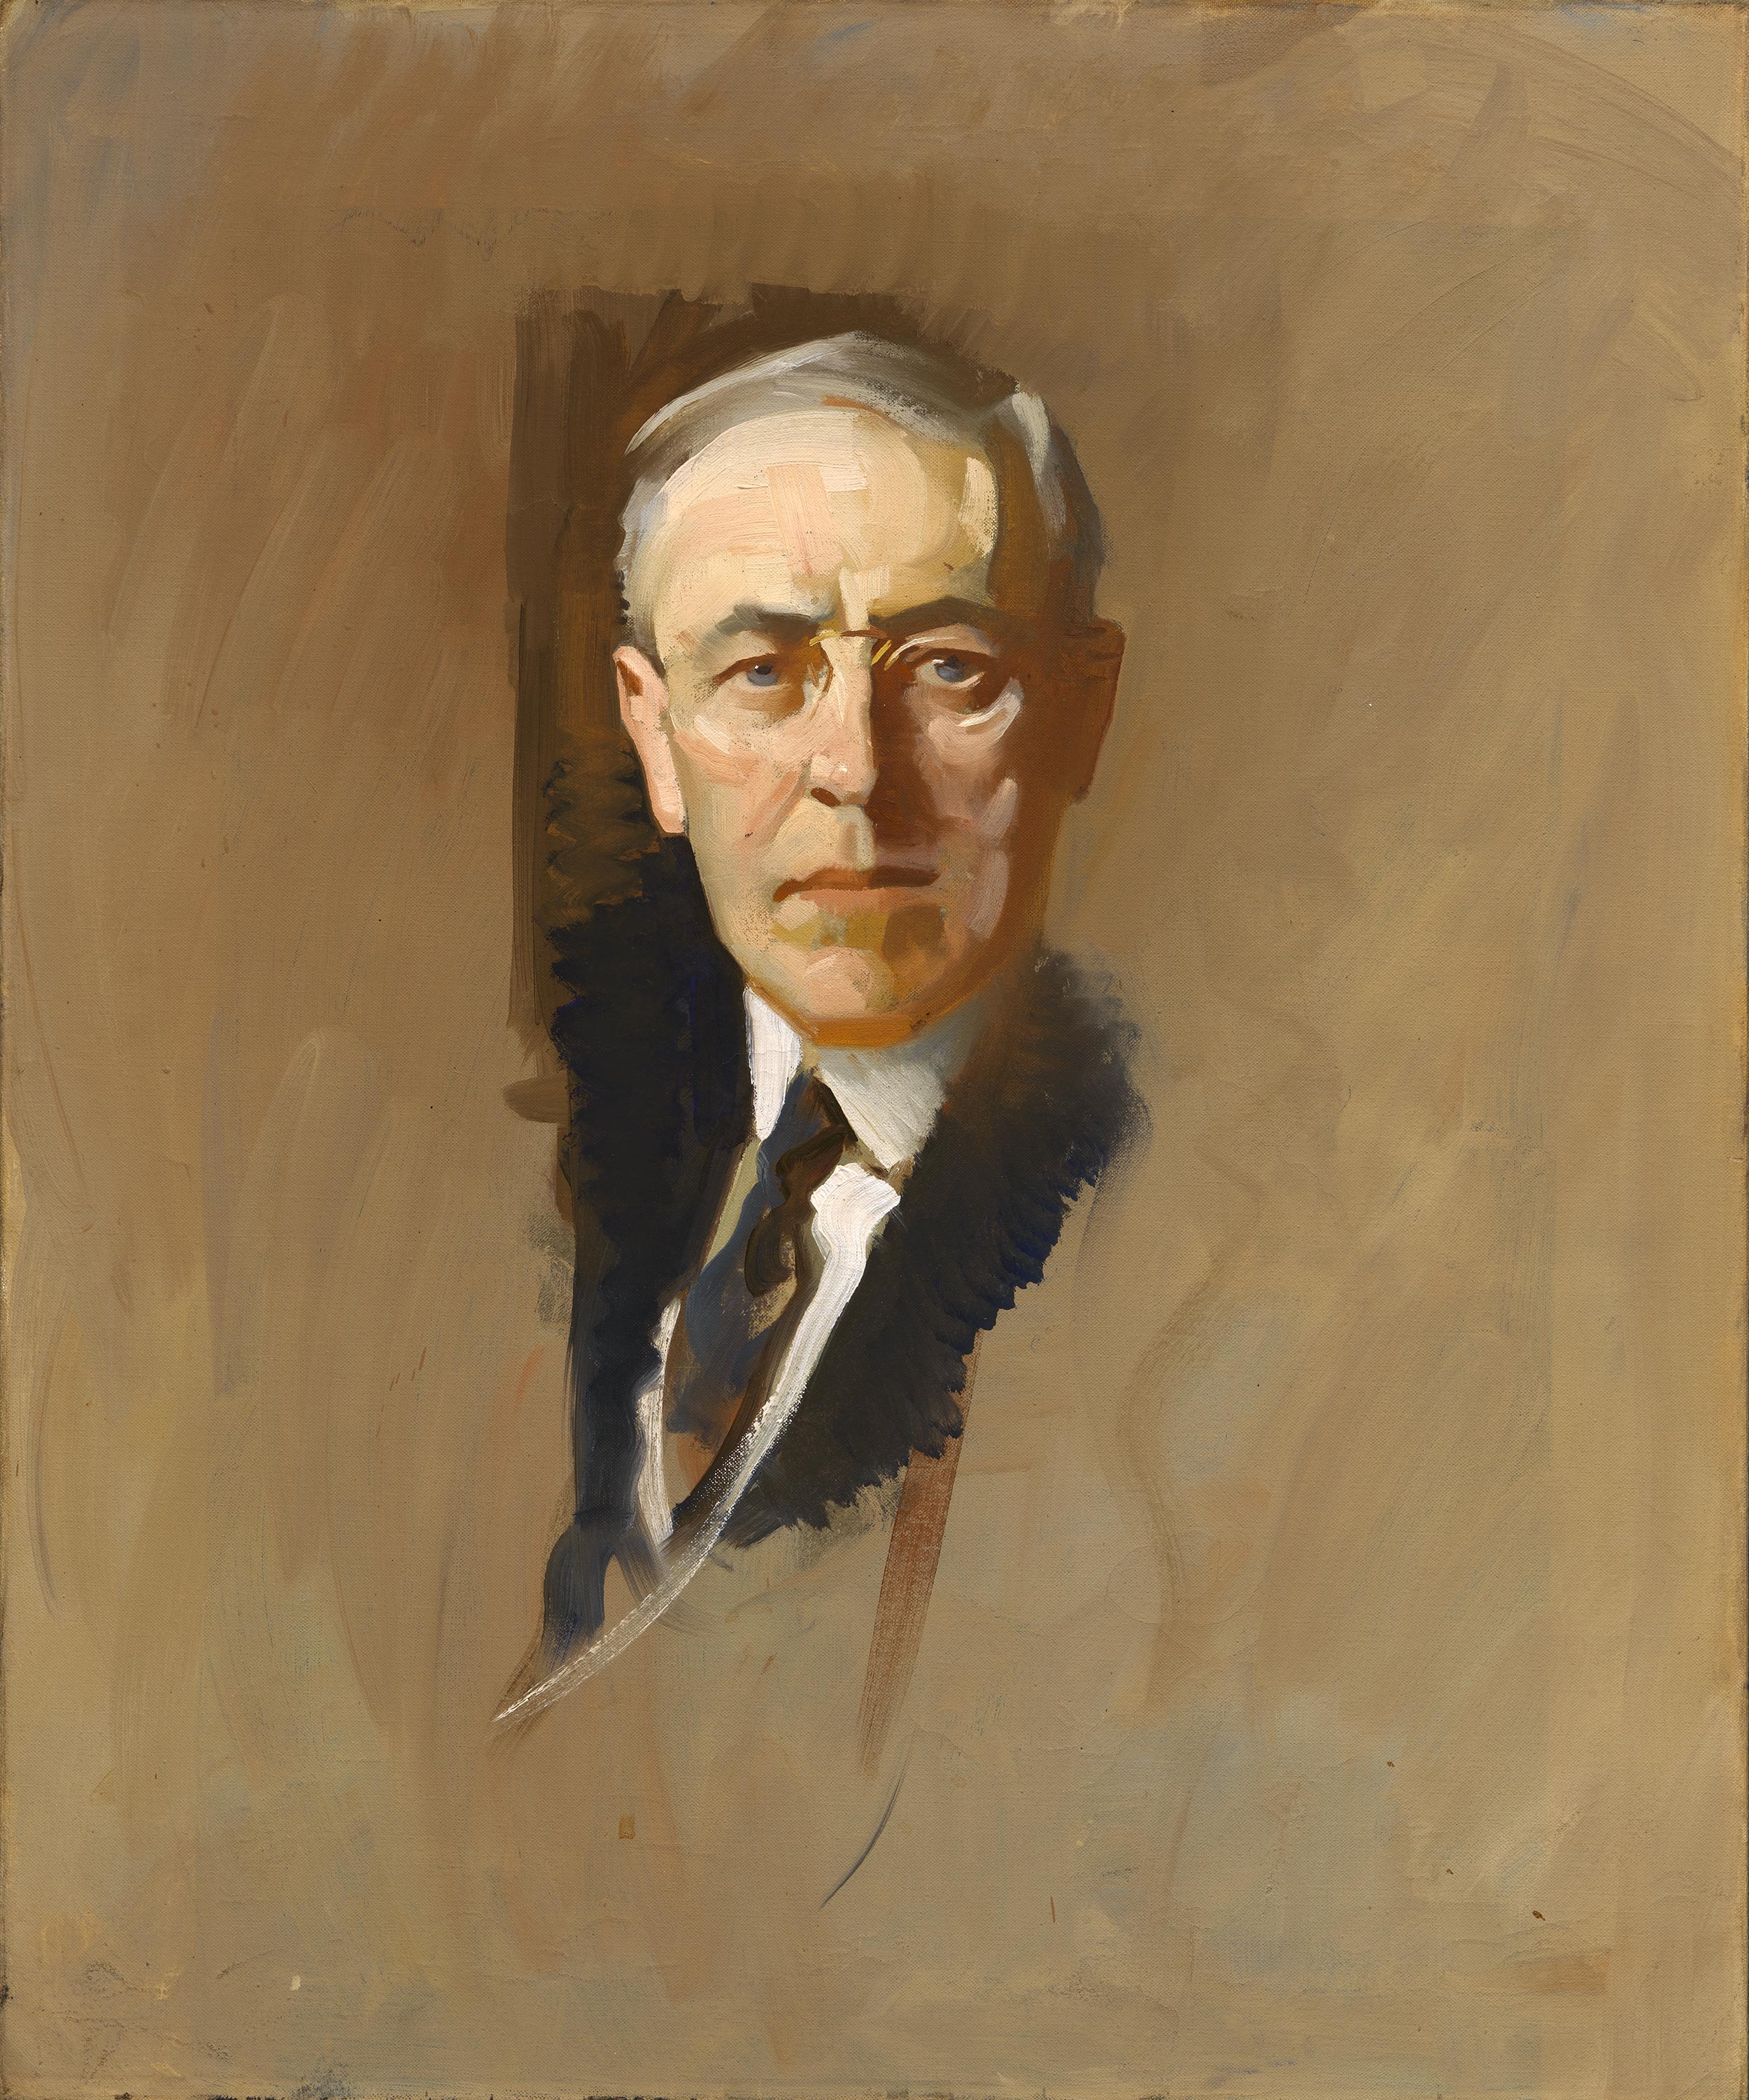 Bust-length oil sketch of a gray-haired man in a dark suit